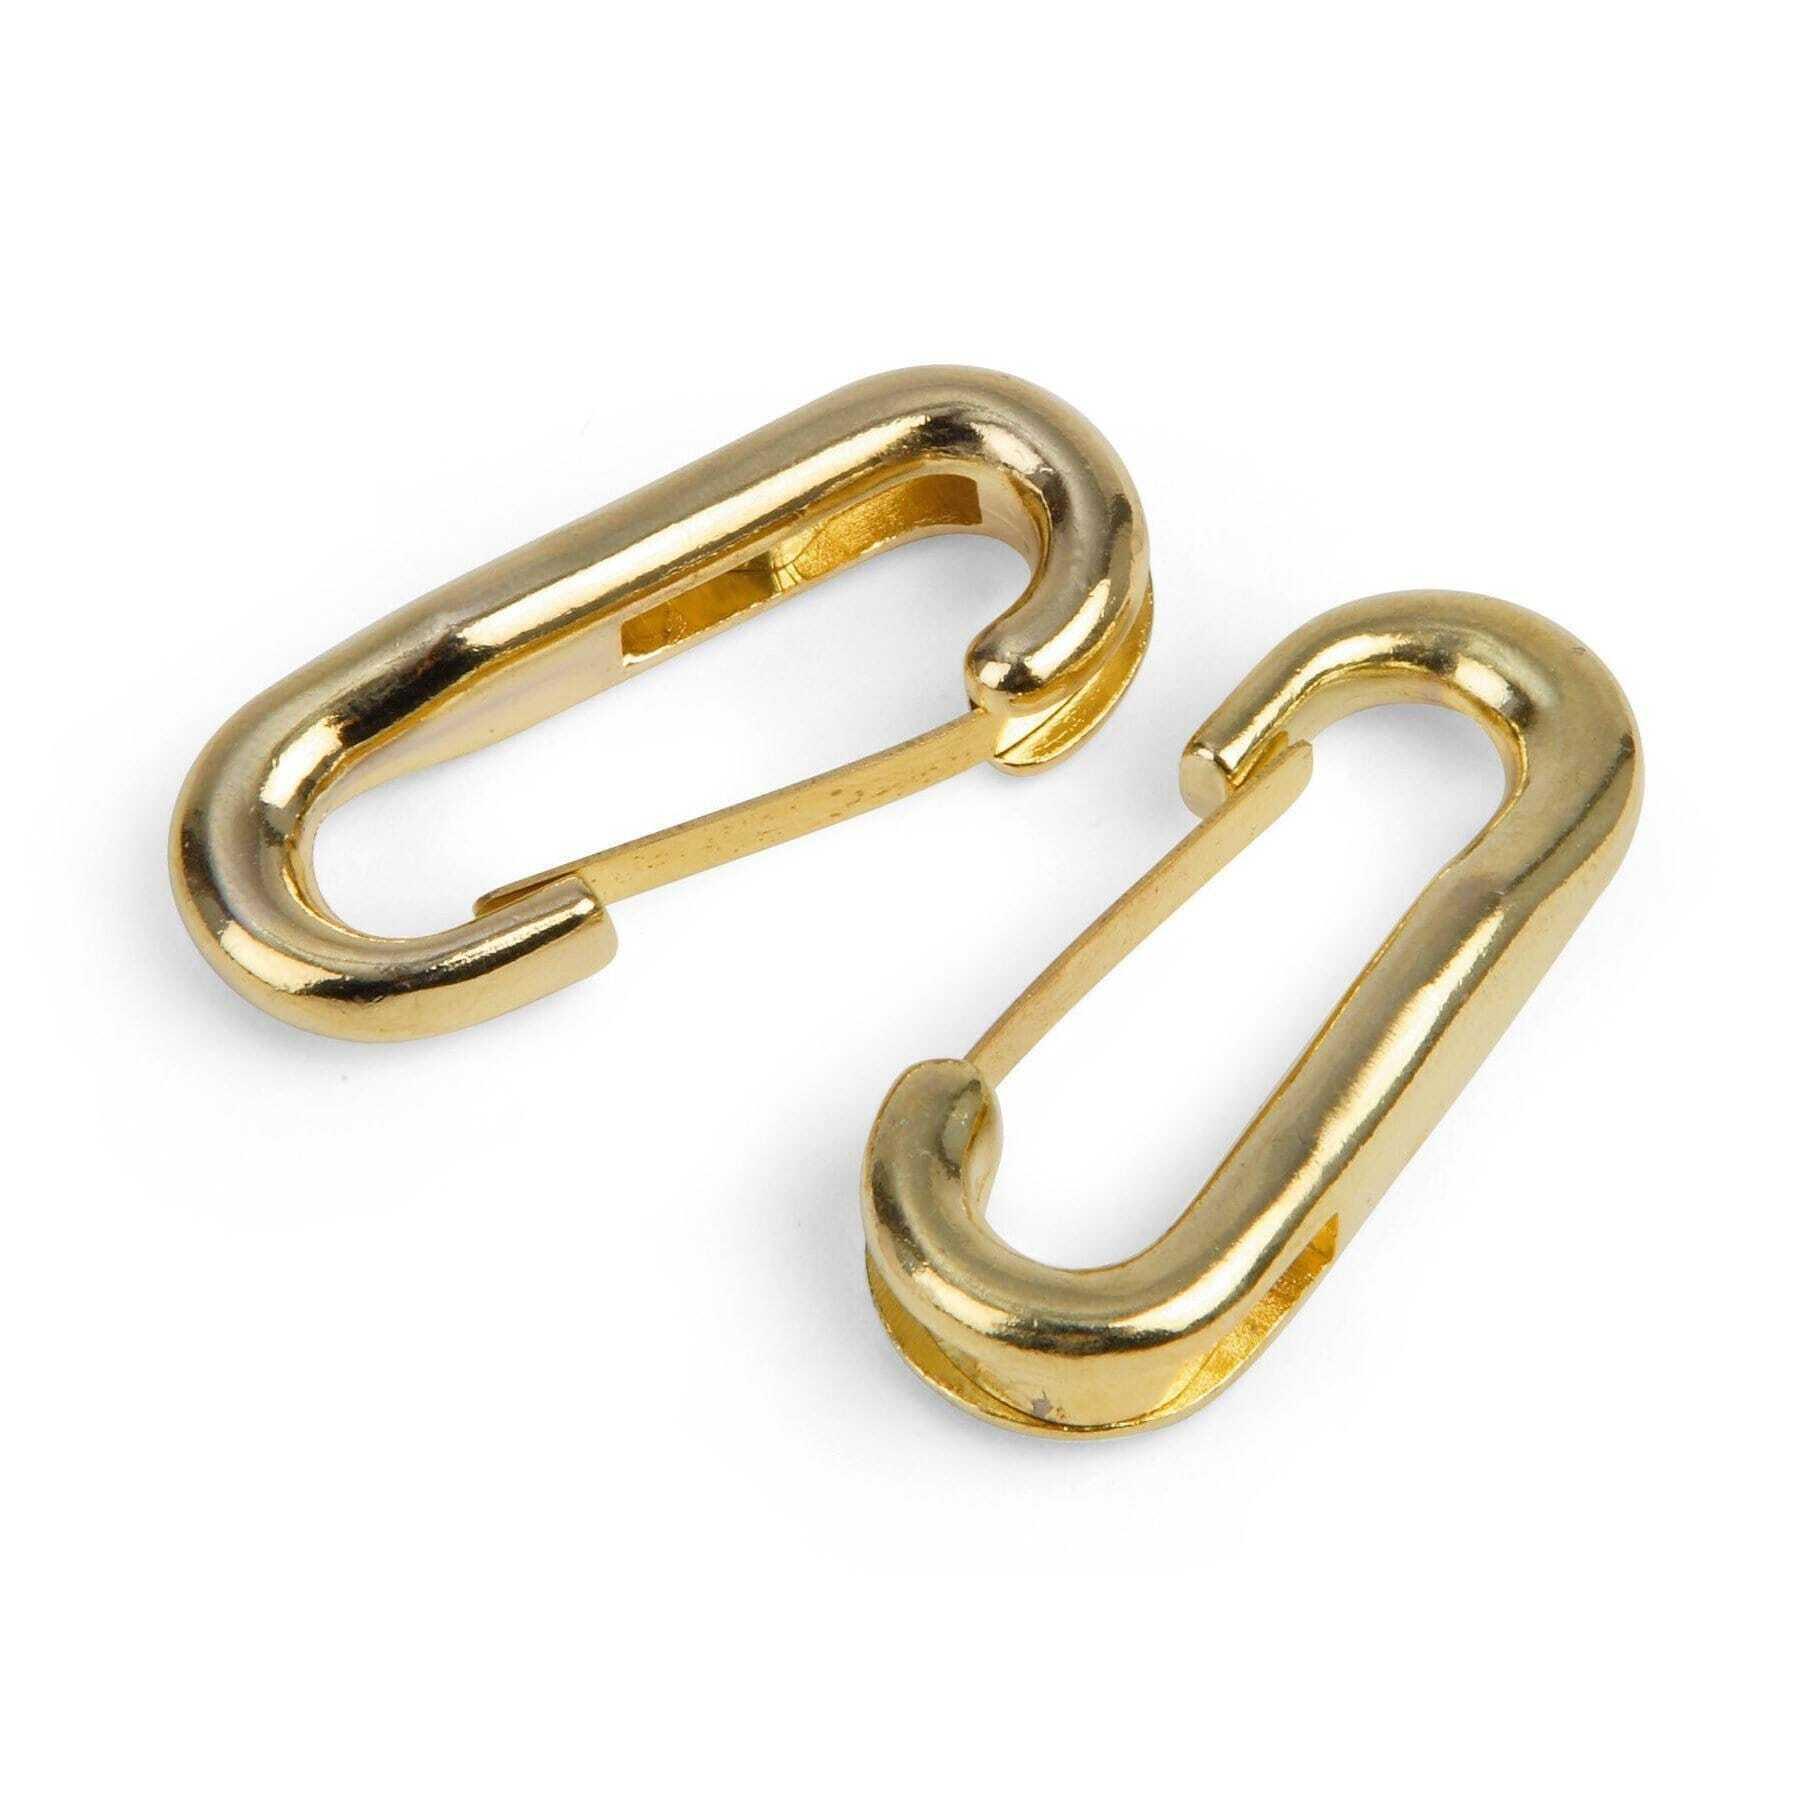 SHIRES Snap Fasteners (Pack of 2) (Brass)